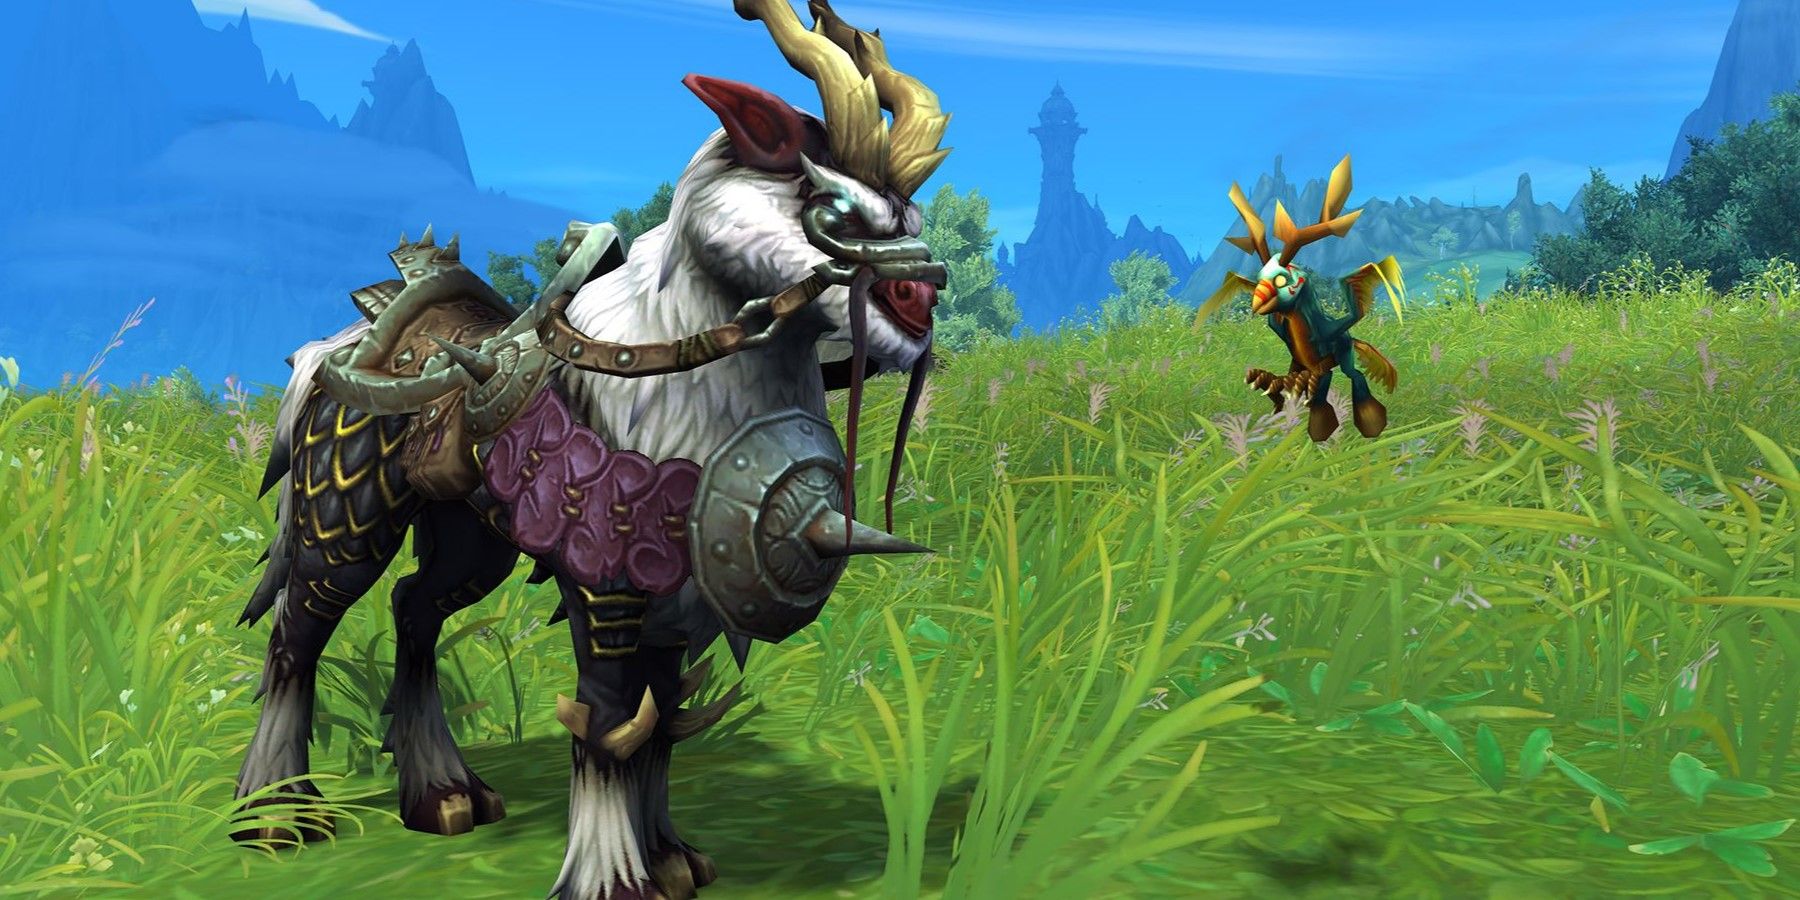 World of Warcraft Dragonflight Adds More Twitch Drops for
the Race to World First